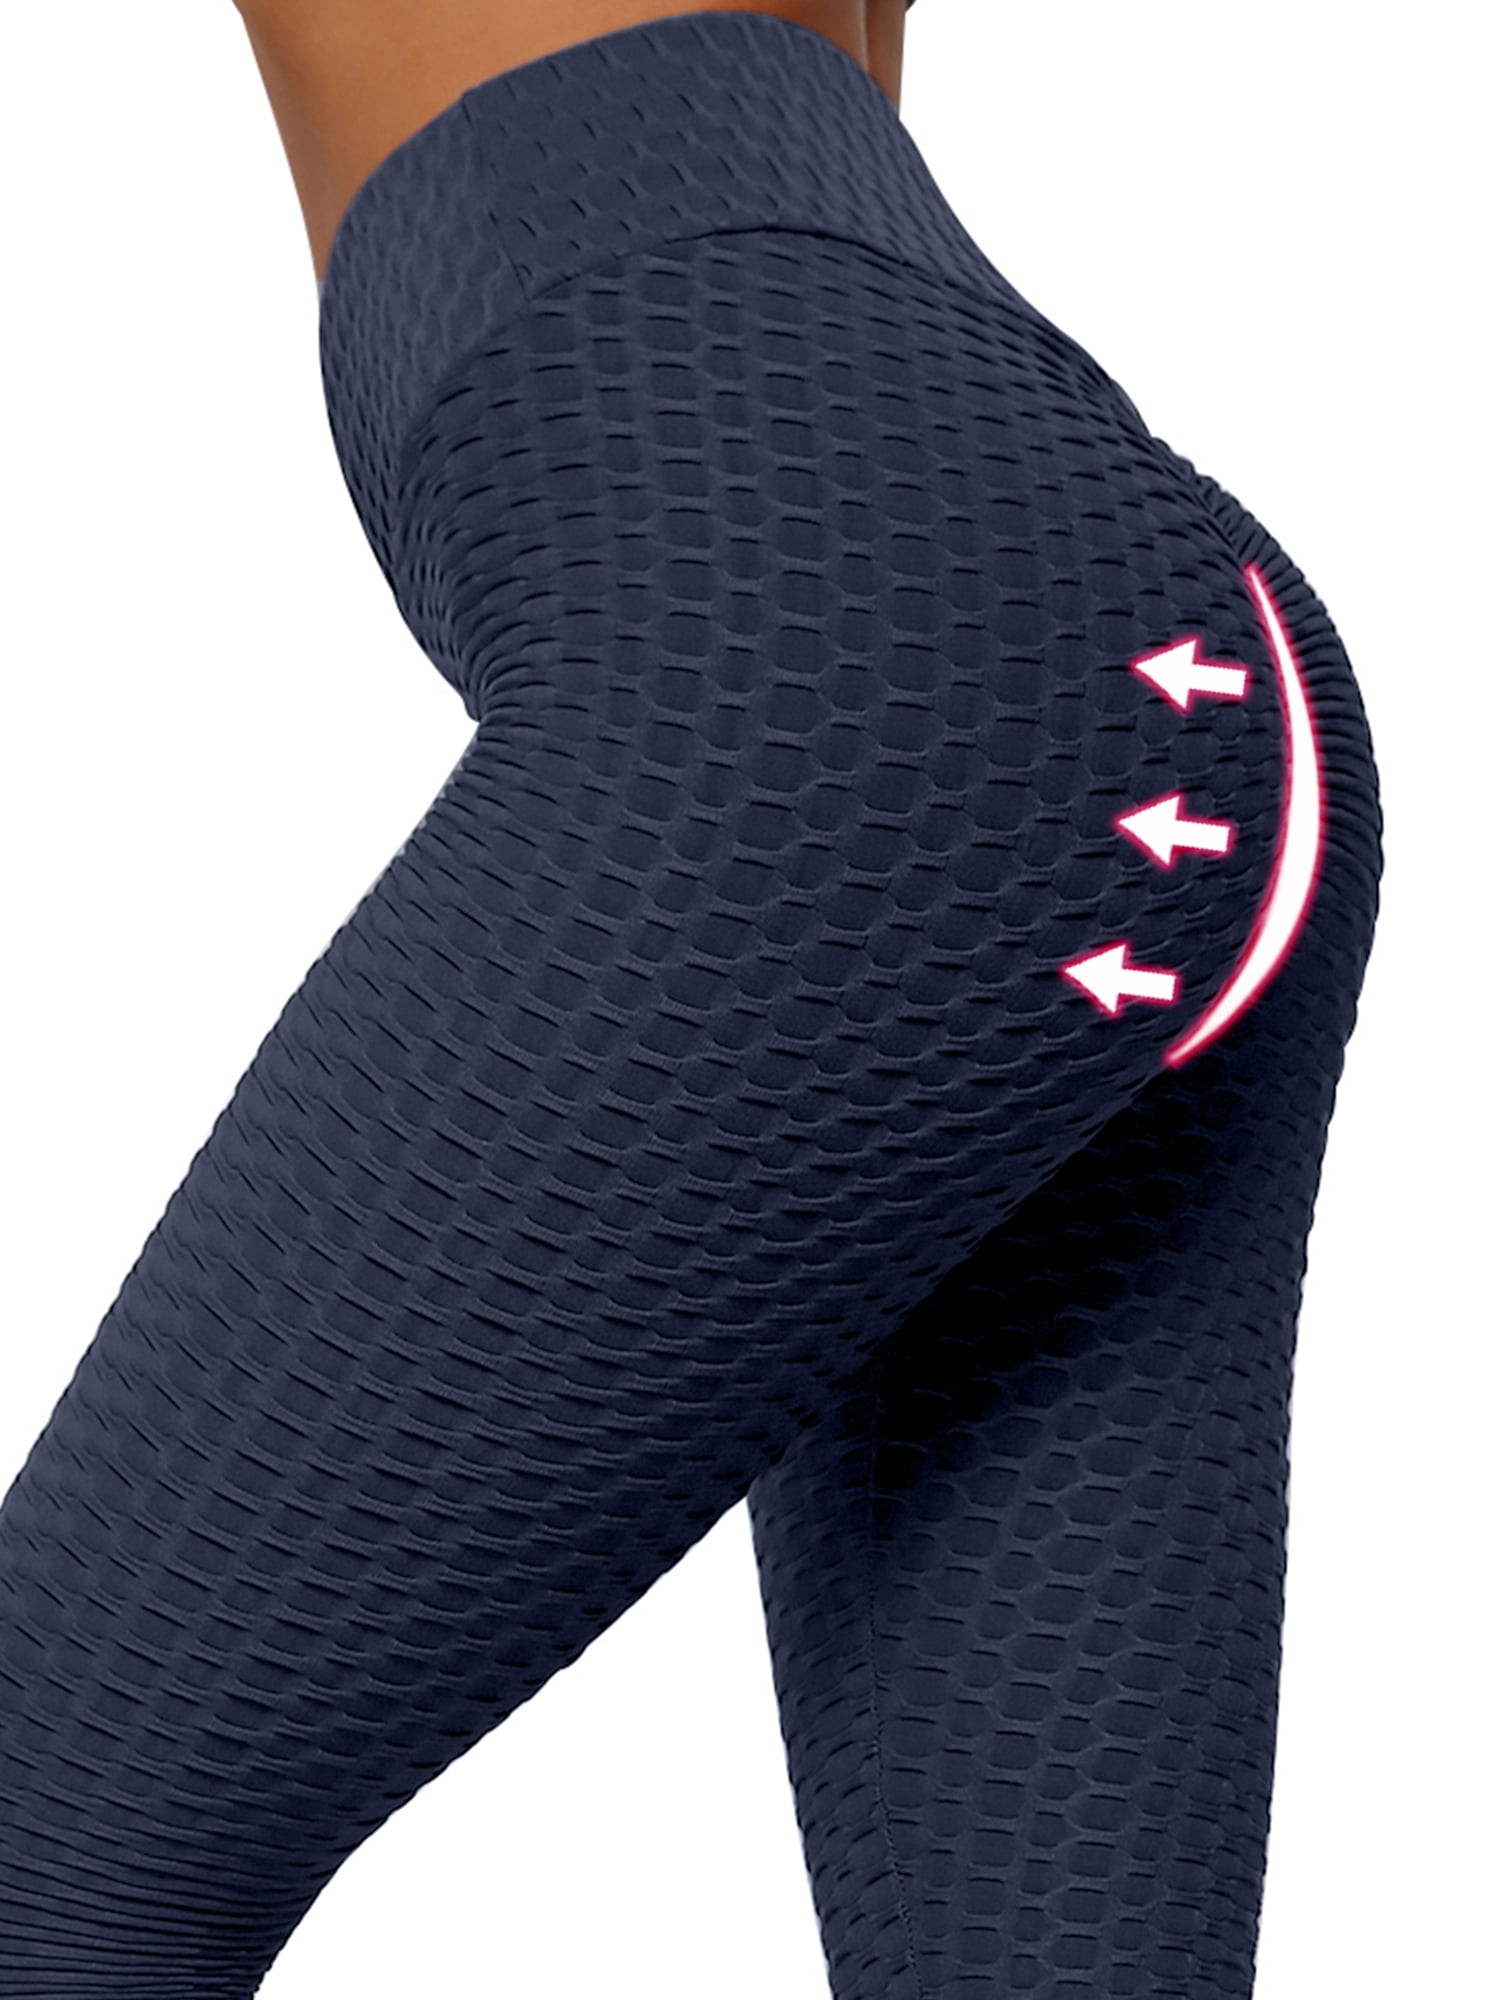  Anti Cellulite Workout Leggings with Comfort Workout Clothes